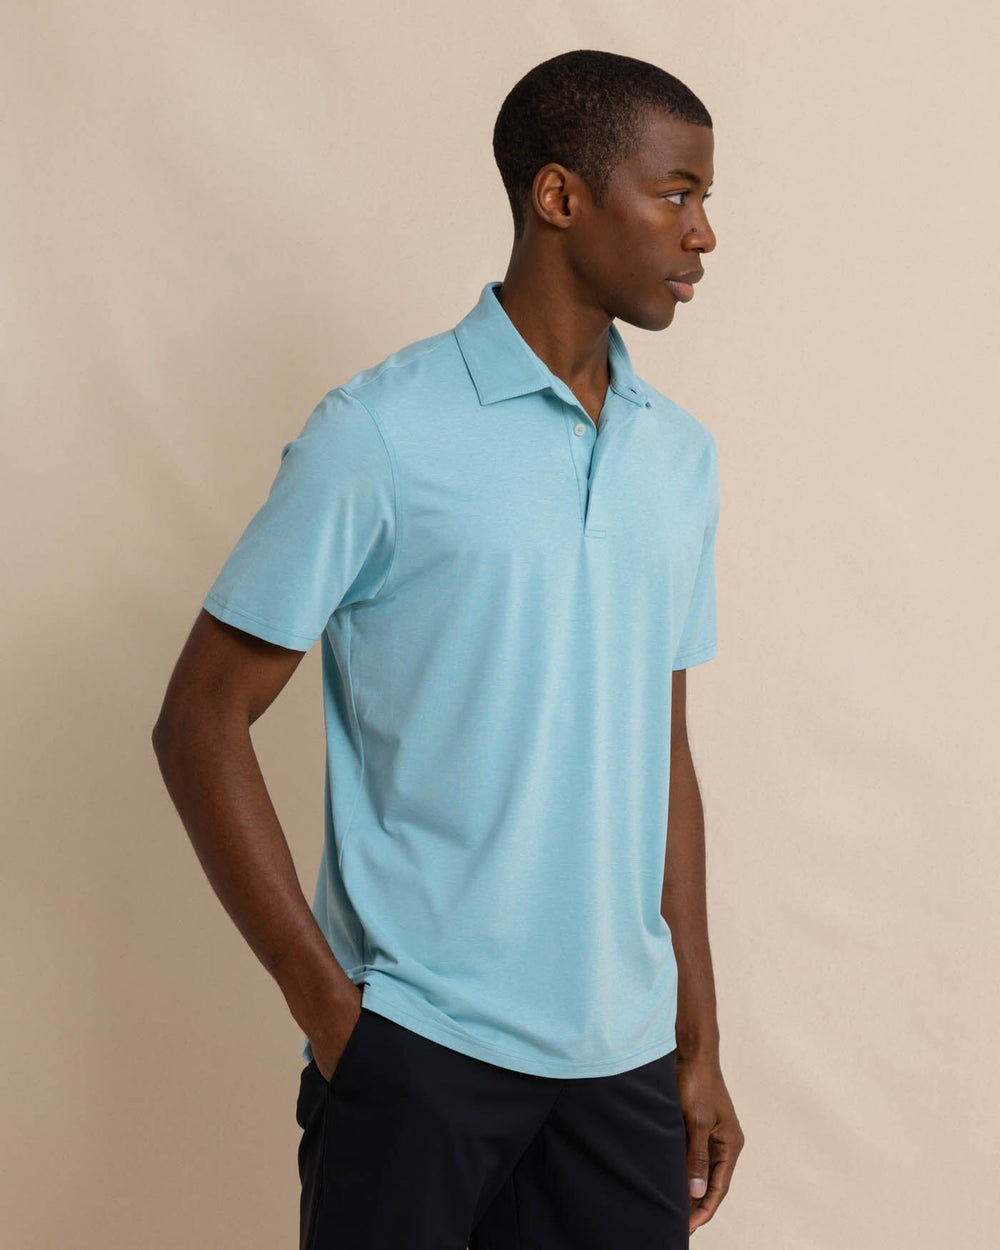 The front view of the Southern Tide brrr eeze Heather Performance Polo Shirt by Southern Tide - Heather Marine Blue